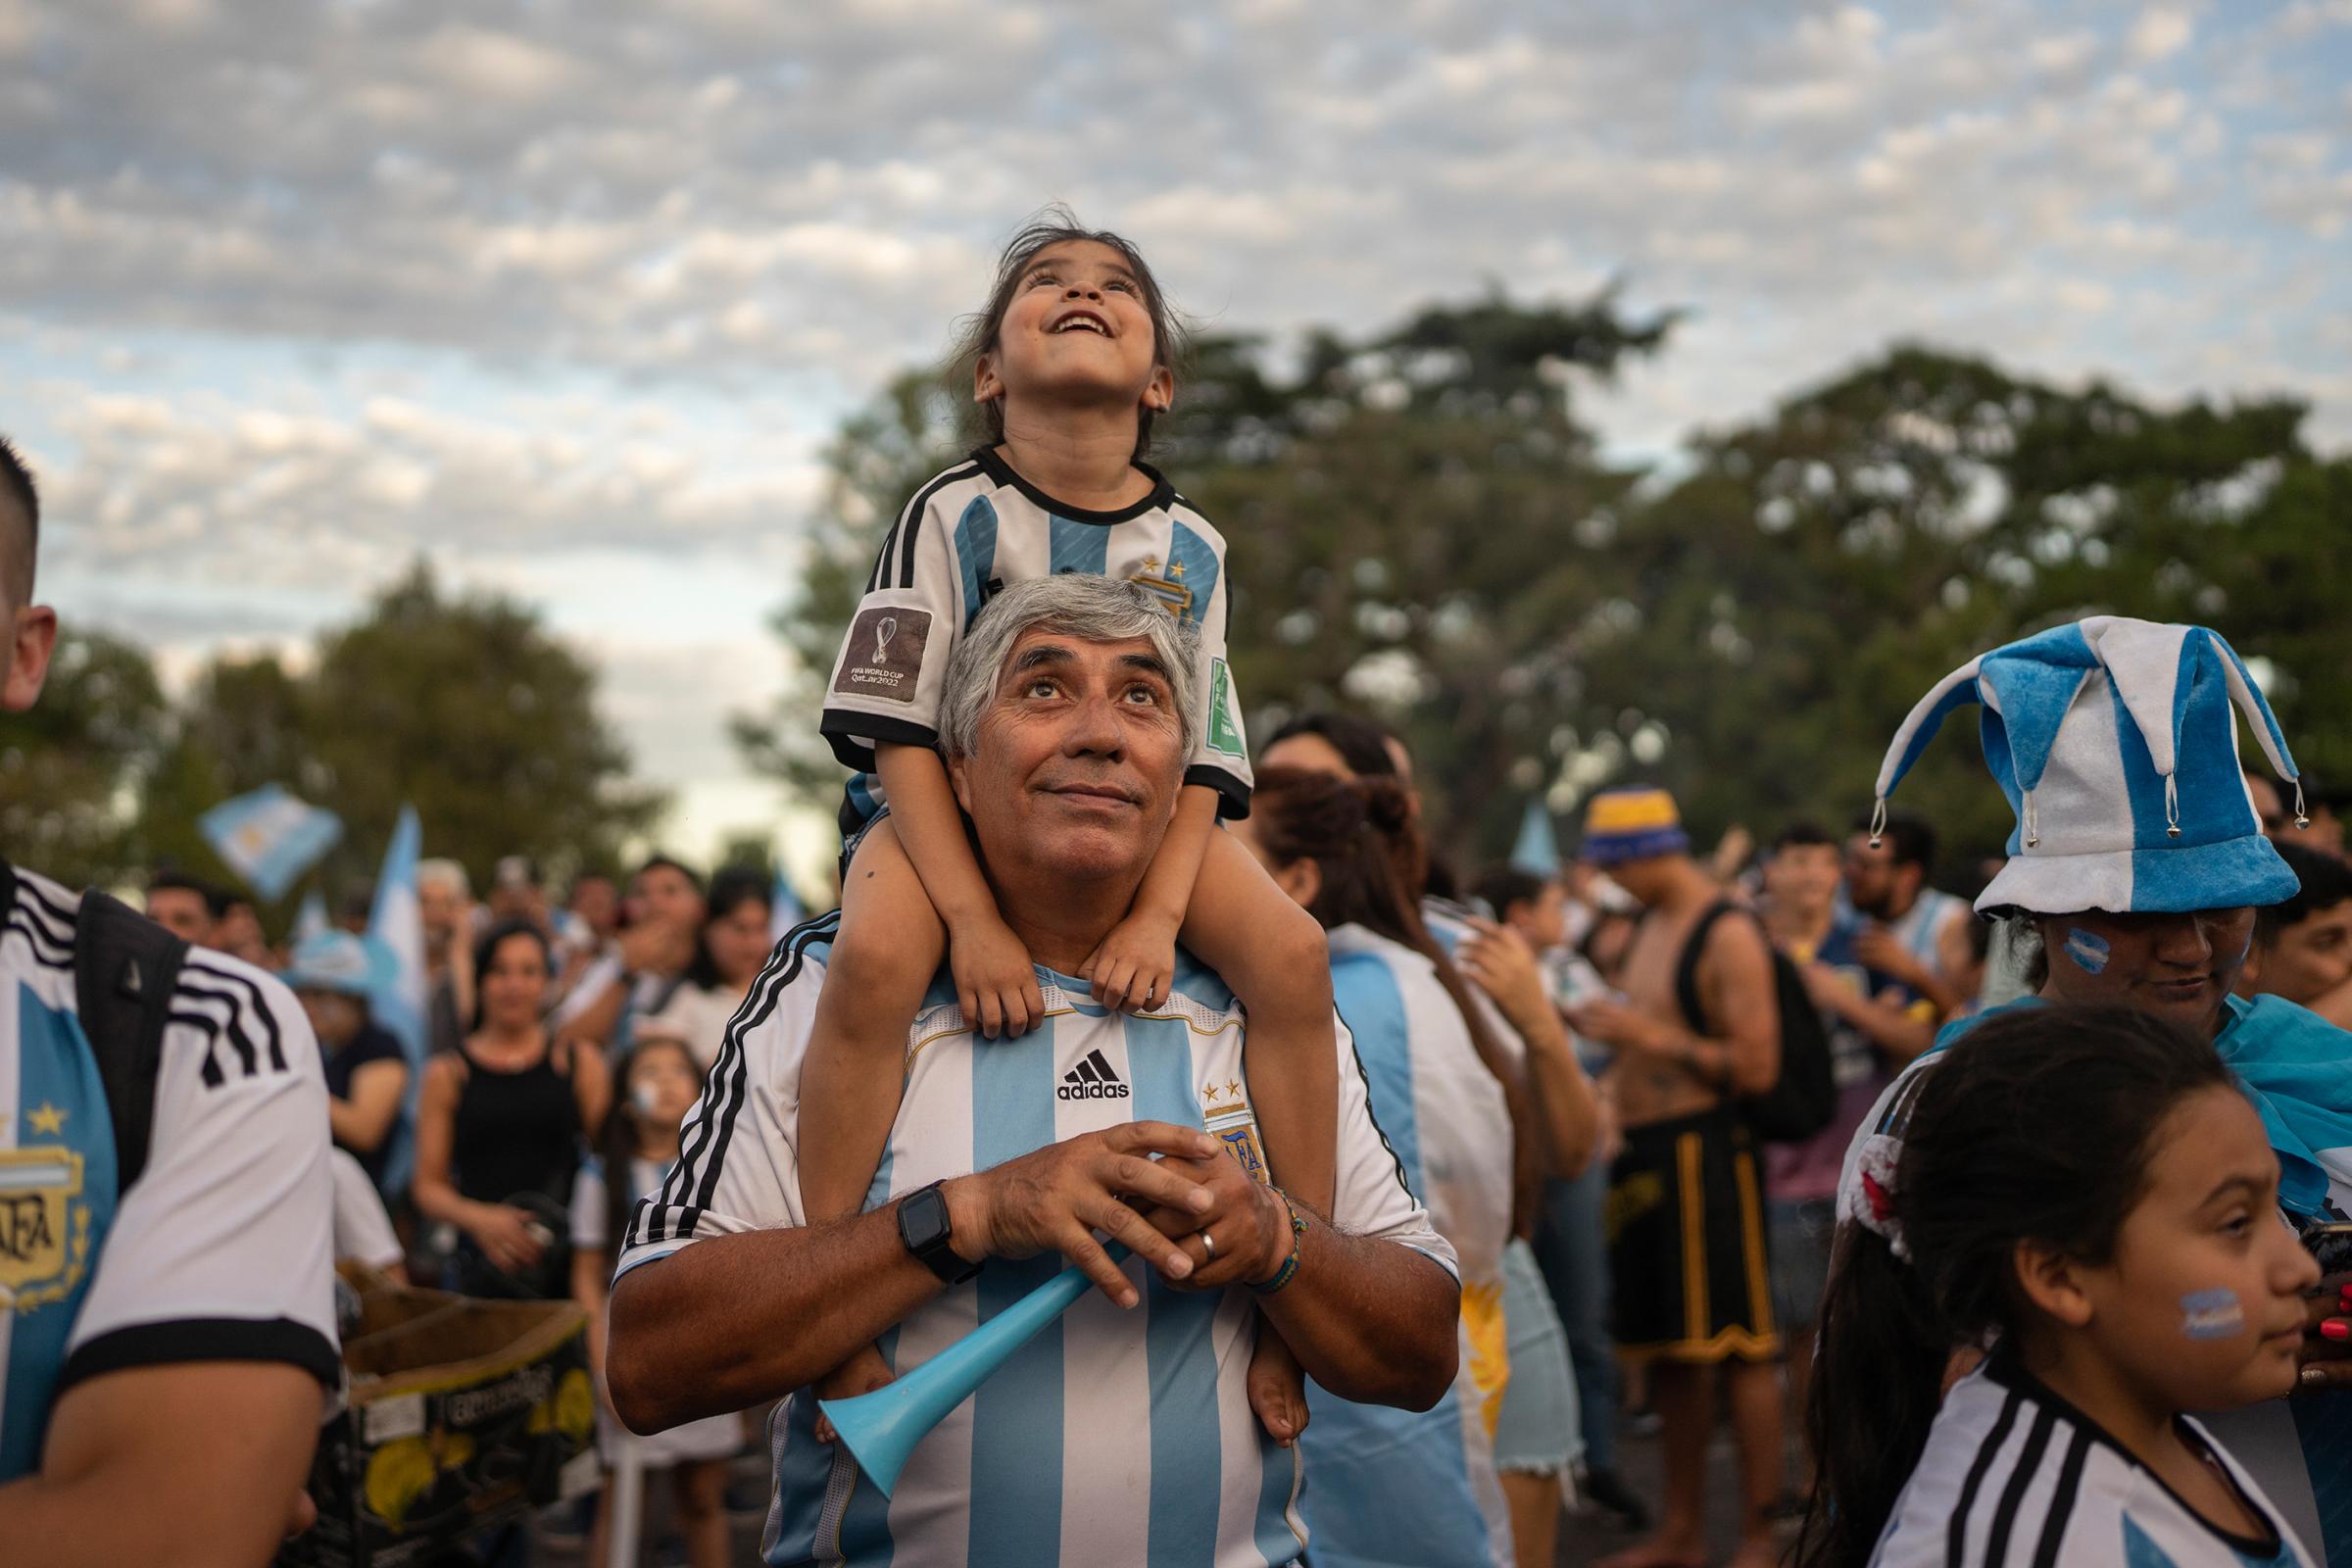 The city of Messi - In the city of Rosario, soccer is lived with great...